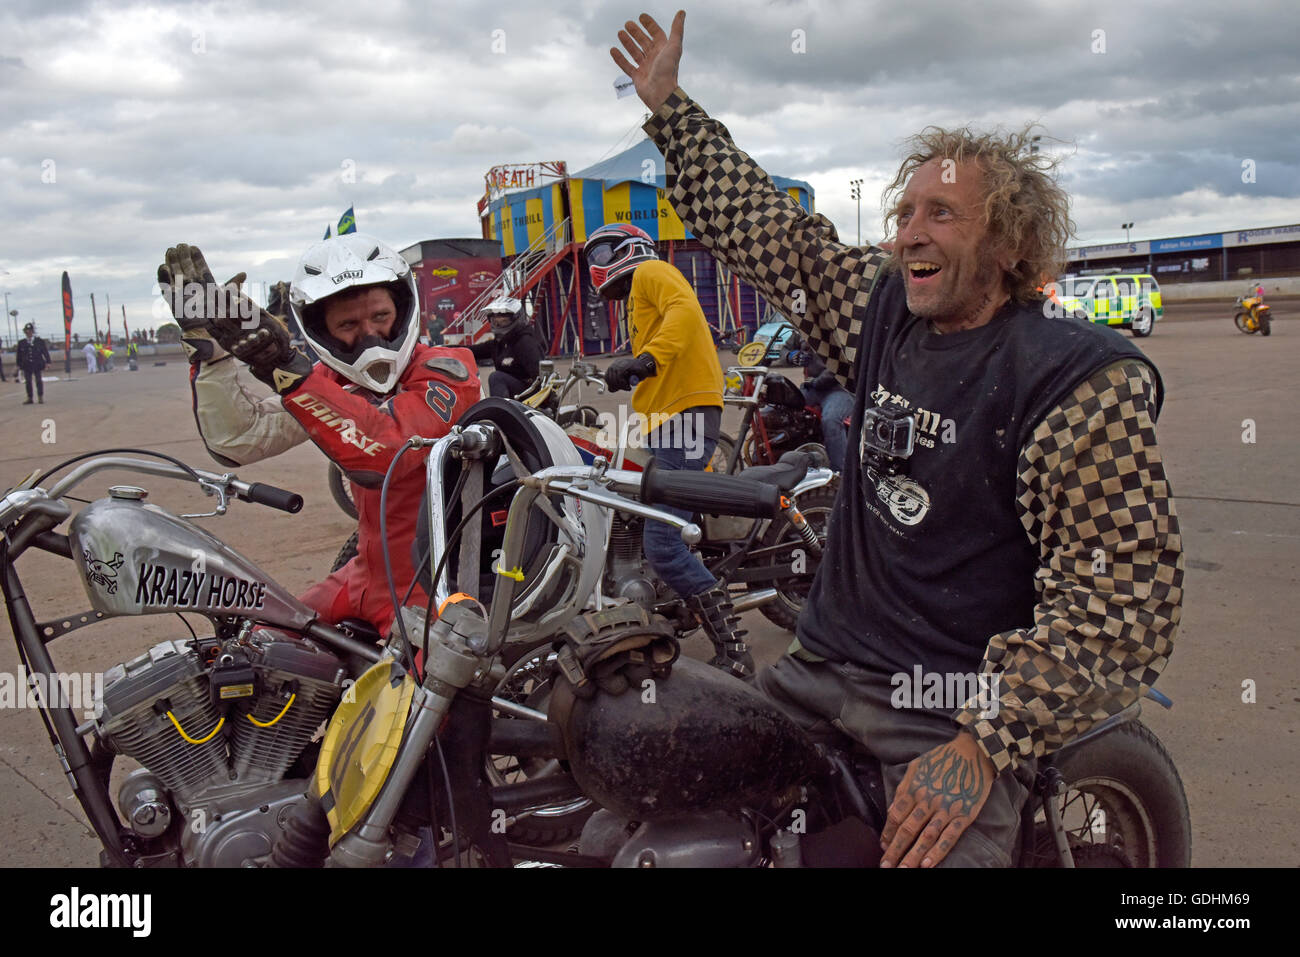 Kings Lynn, Norfolk, United Kingdom. 16.07.2016. Fifth annual Dirt Quake festival with Guy Martin and Carl FogartyKings Lynn, Norfolk, United Kingdom. 16.07.2016. Fifth annual Dirt Quake festival at the Adrian Flux Arena, Norfolk. Dirt Quake is racing road bikes on a dirt track. Lorry mechanic, Mortorbike Racer and TV celebrity Guy Martin races on a Crazy Horse Harley Davidson (pictured, loosing to racer, Odgie) and World Superbike racer, Carl Fogerty MBE races a Triumph. Classes include Inappropriate Road Bike, Ladies, and Street Tracker. Stock Photo